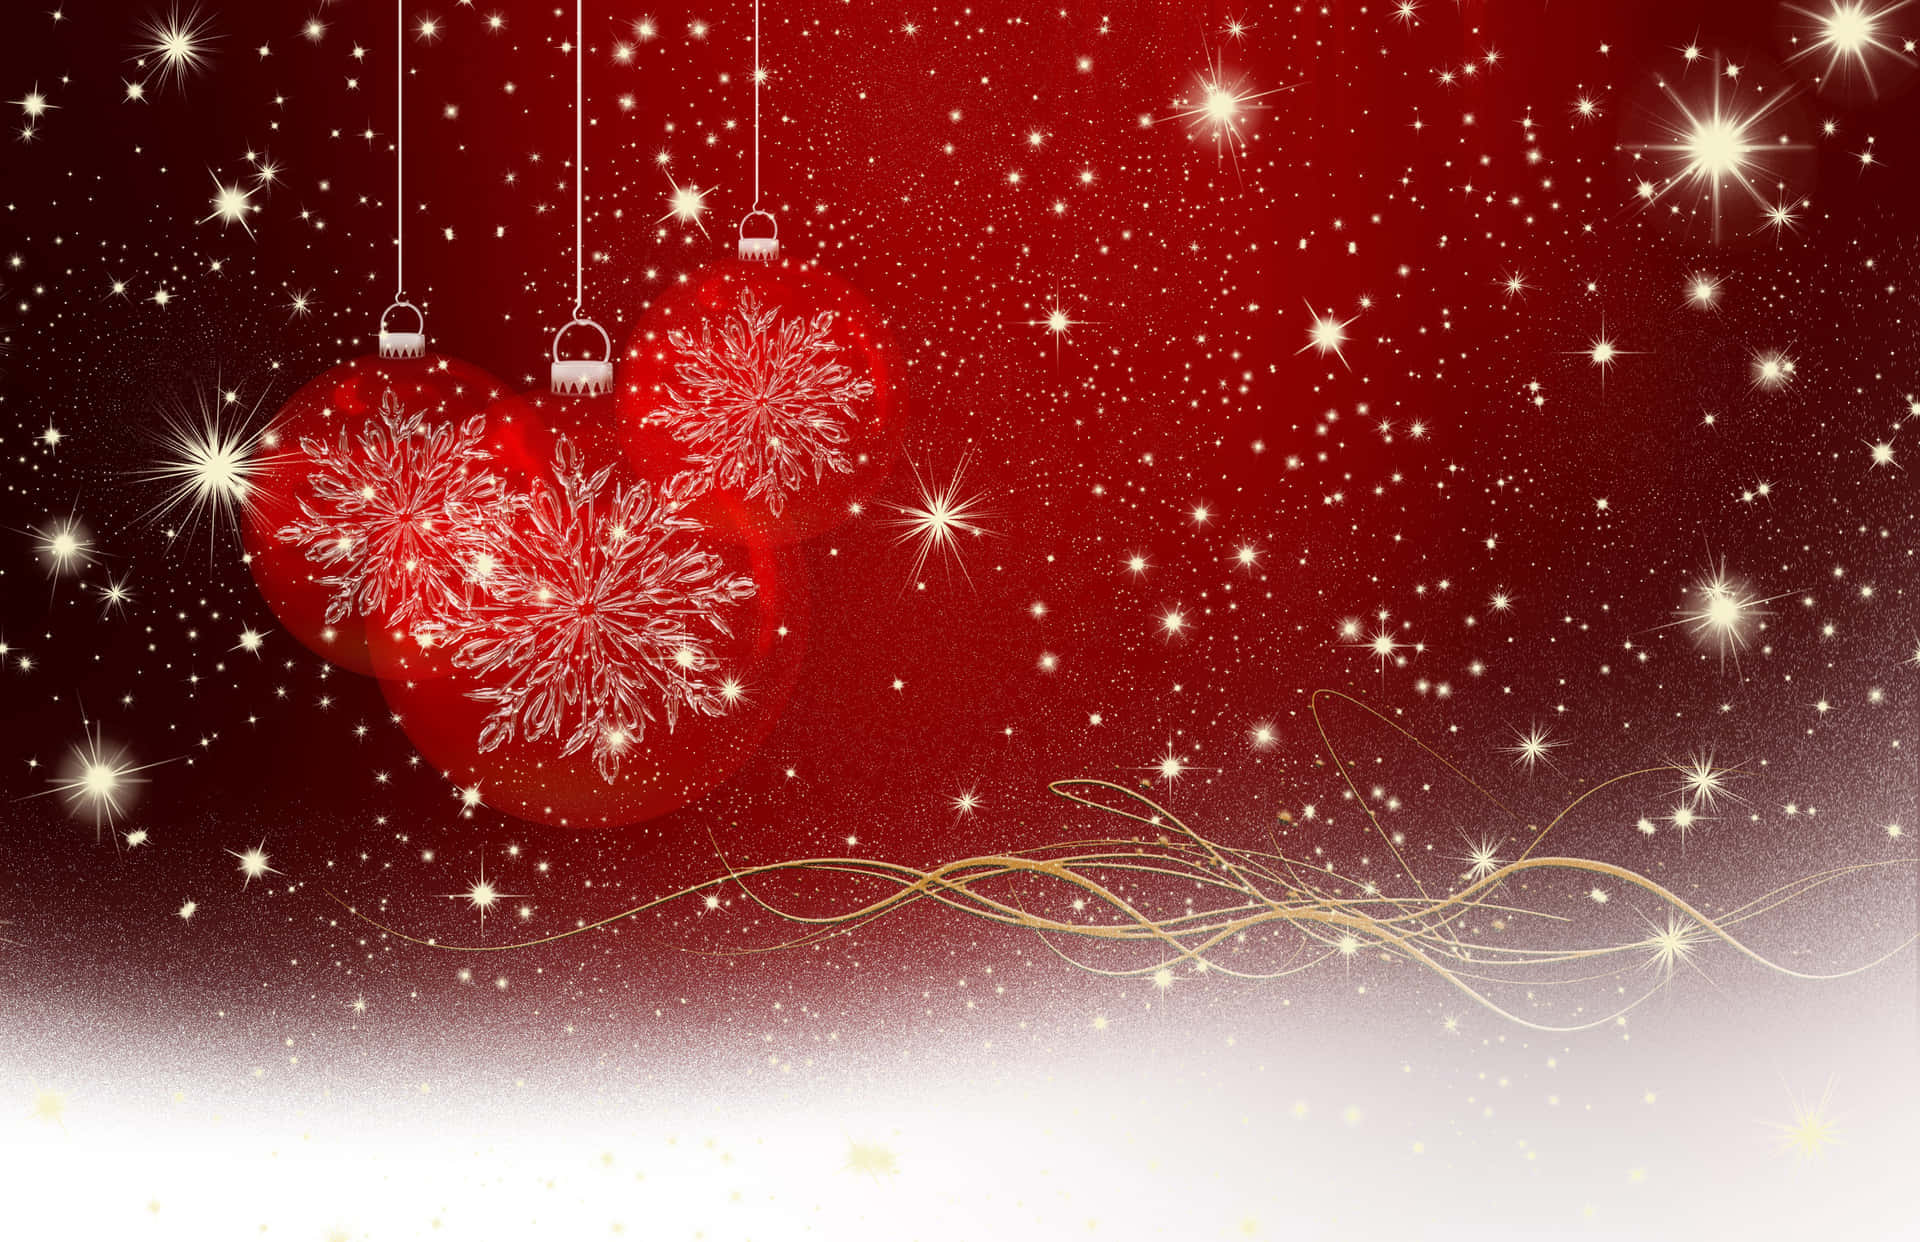 Sparkling Christmas Ornaments Background Wallpaper